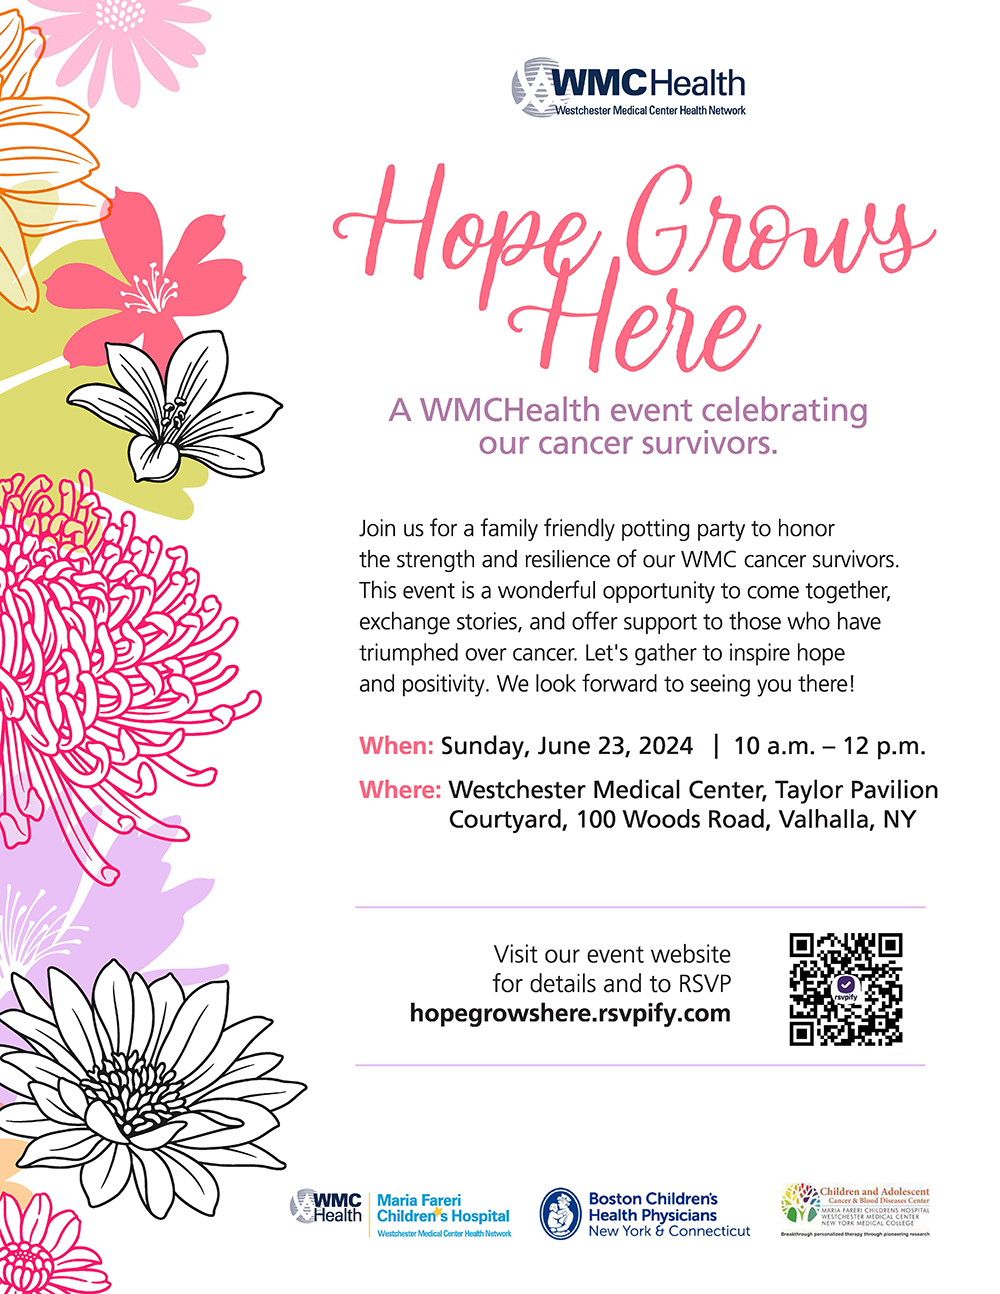 Hope Grows Here event